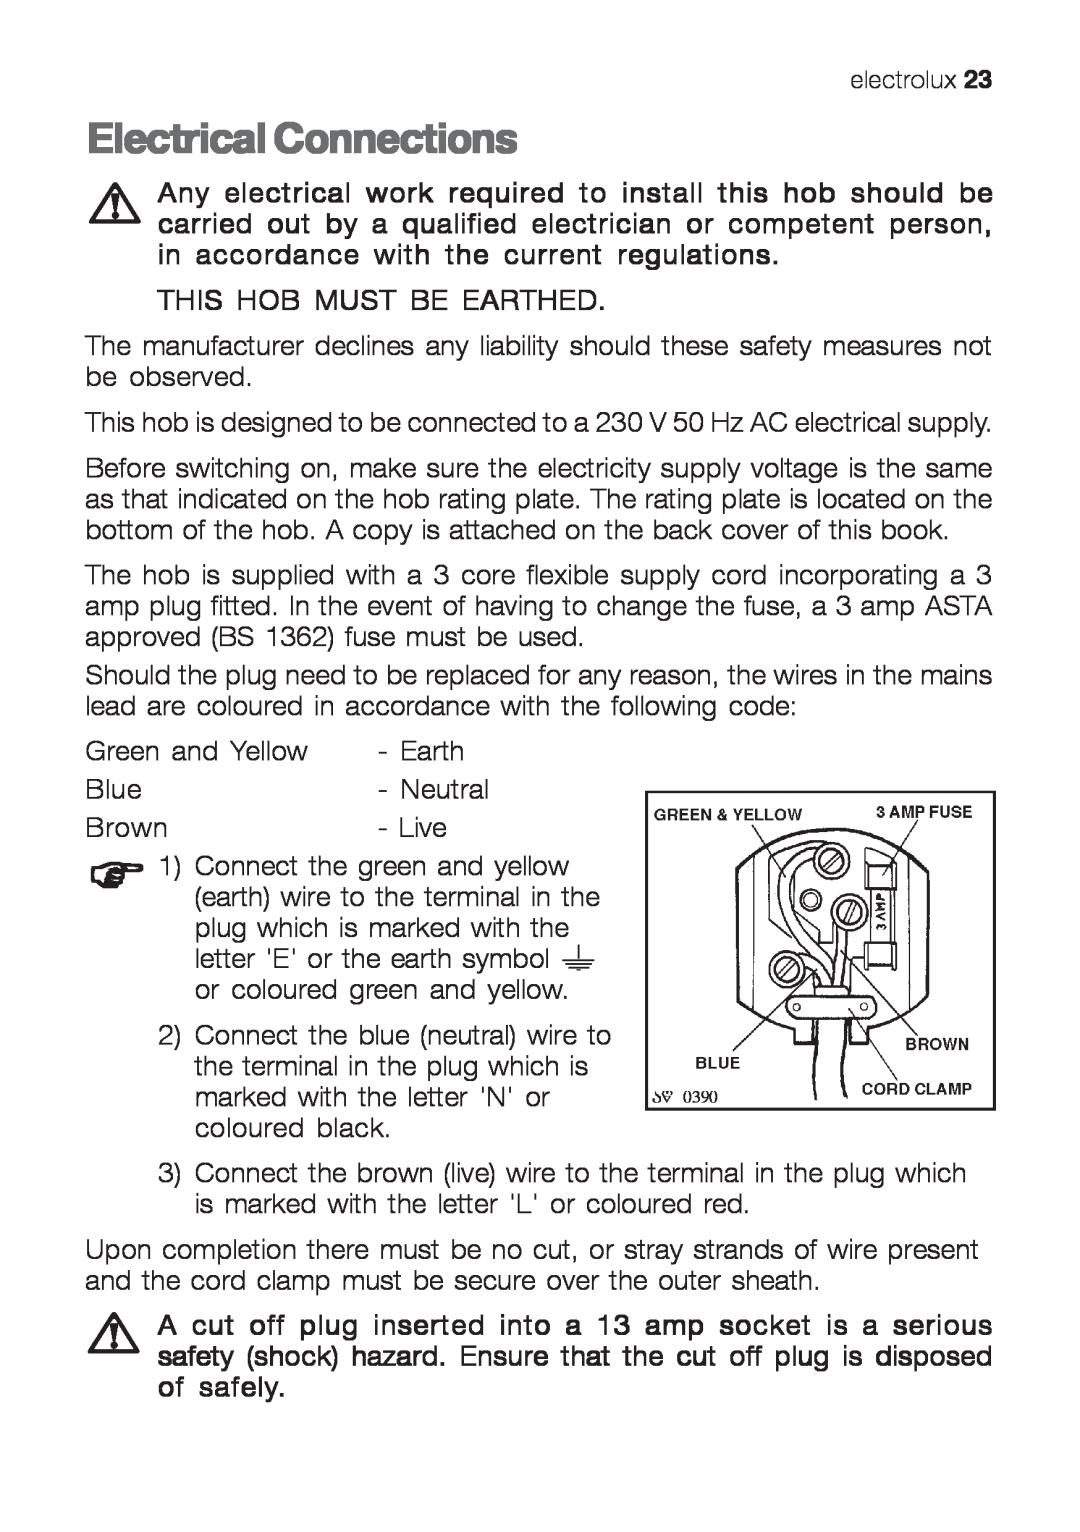 Electrolux EHG 6402, EHG 6412, EHG 6832 manual Electrical Connections 